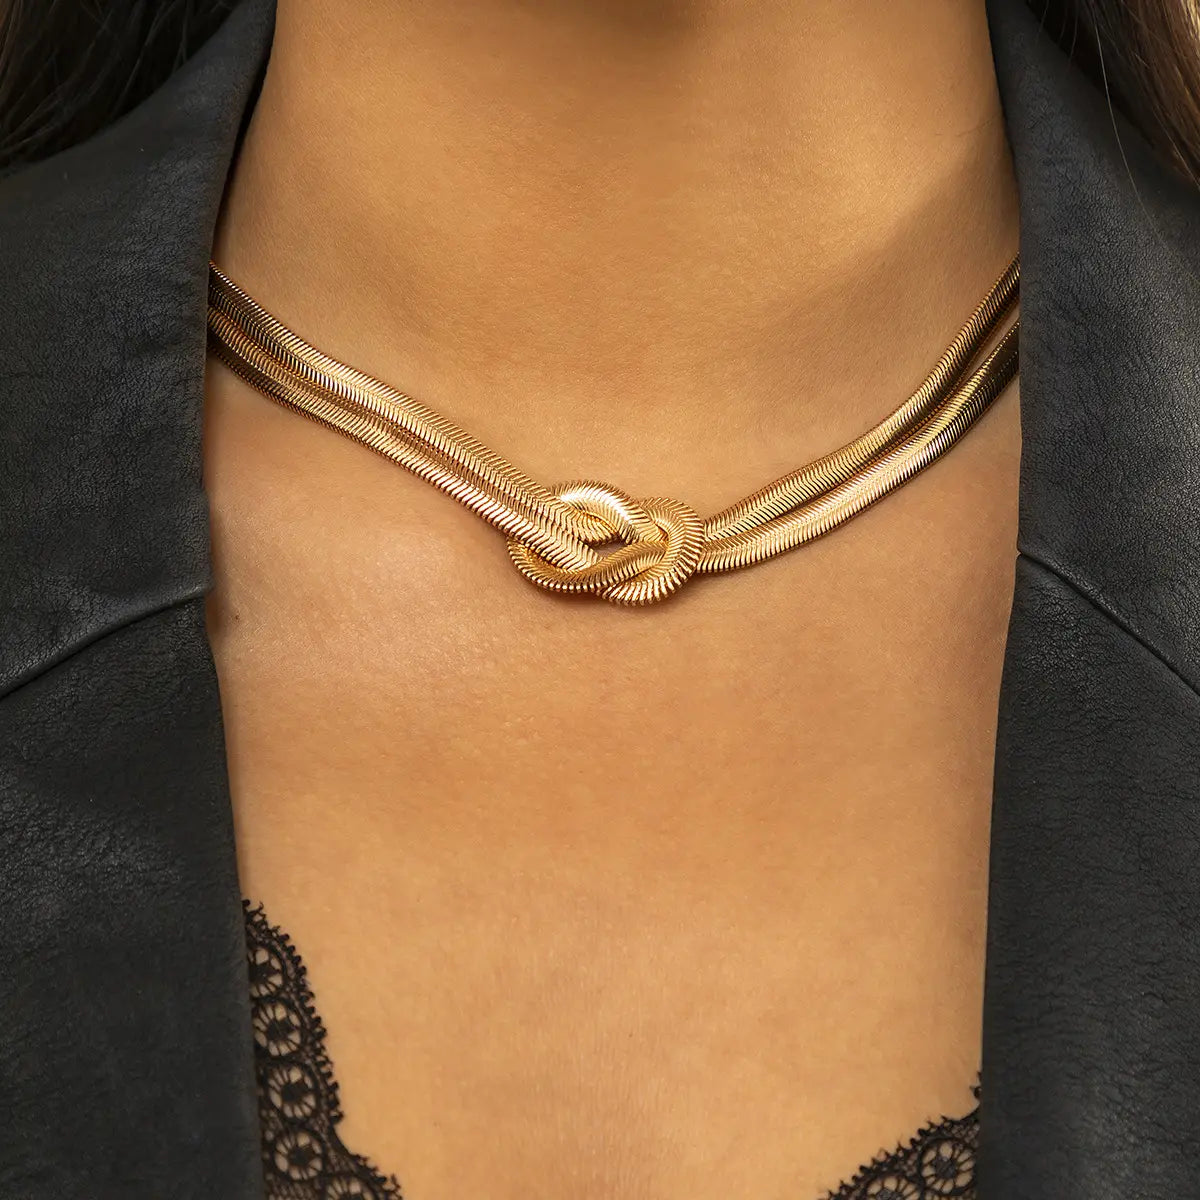 Choker necklace gold with knot-NE493